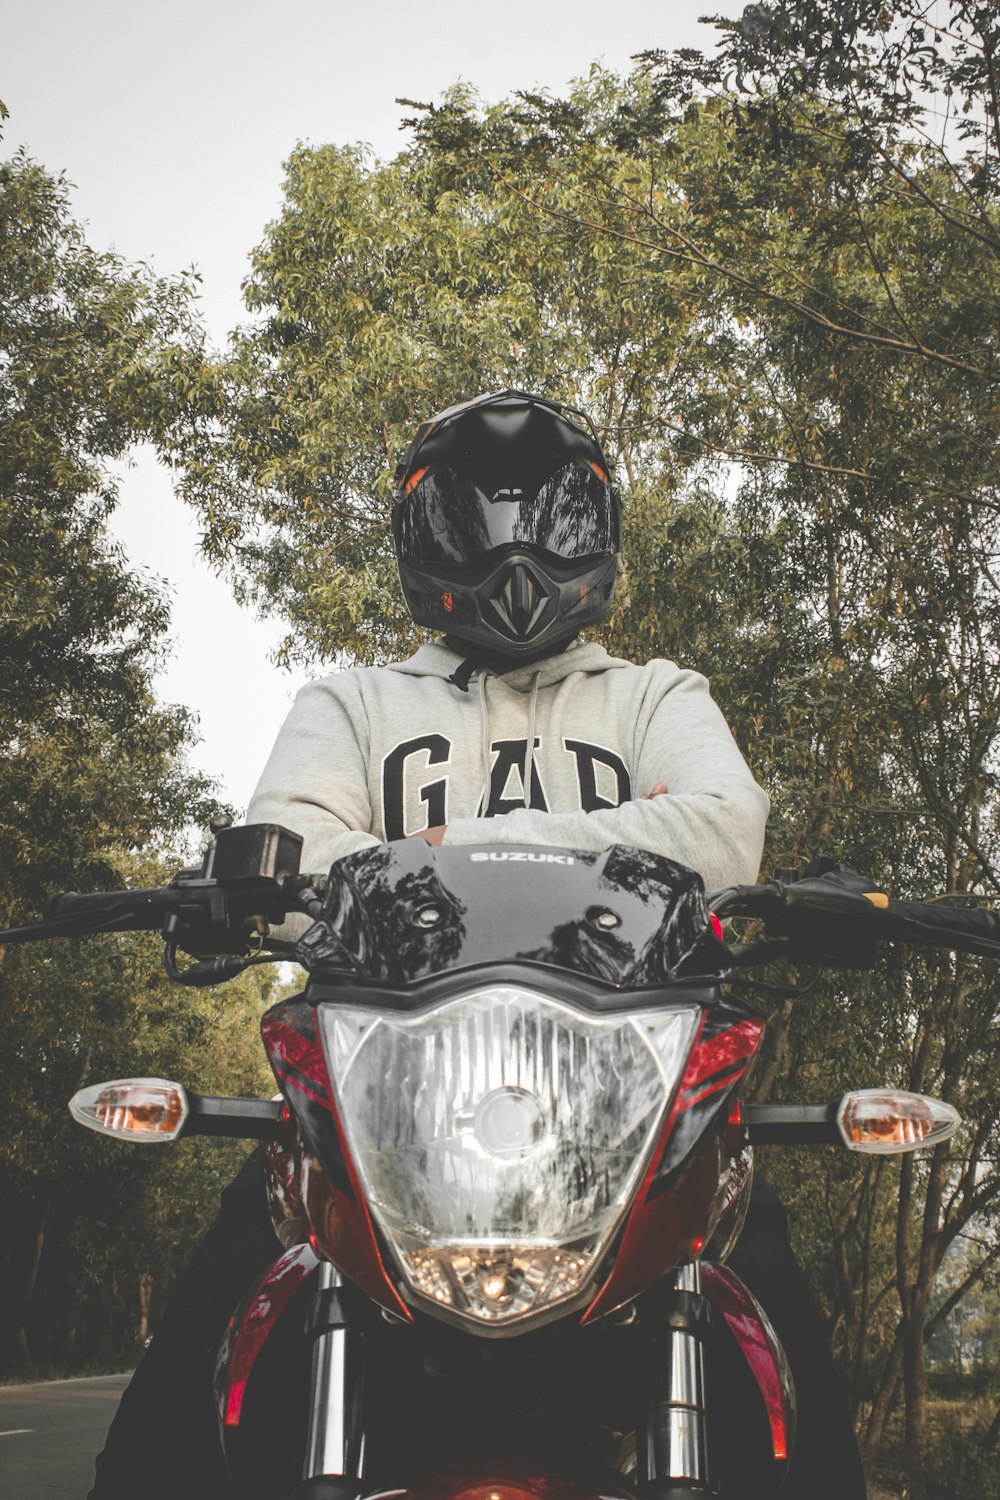 man in black and white jacket wearing black helmet riding on black and red sports bike